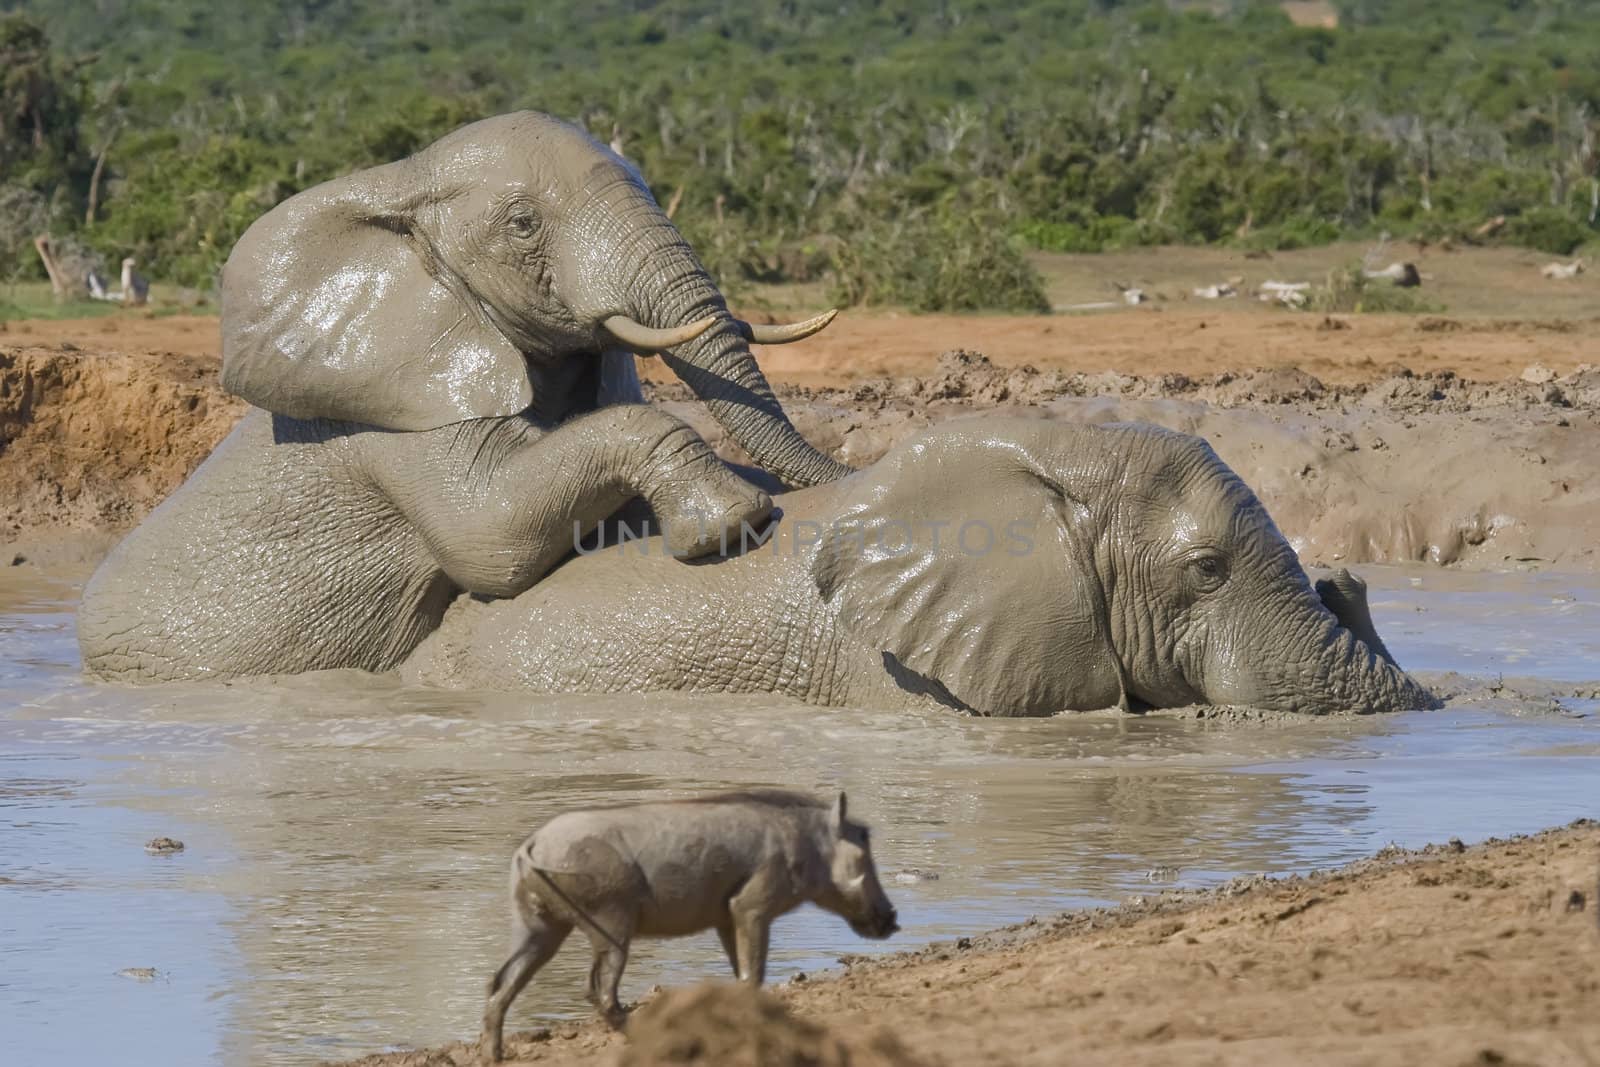 African Elephants playing Dominance game in the water